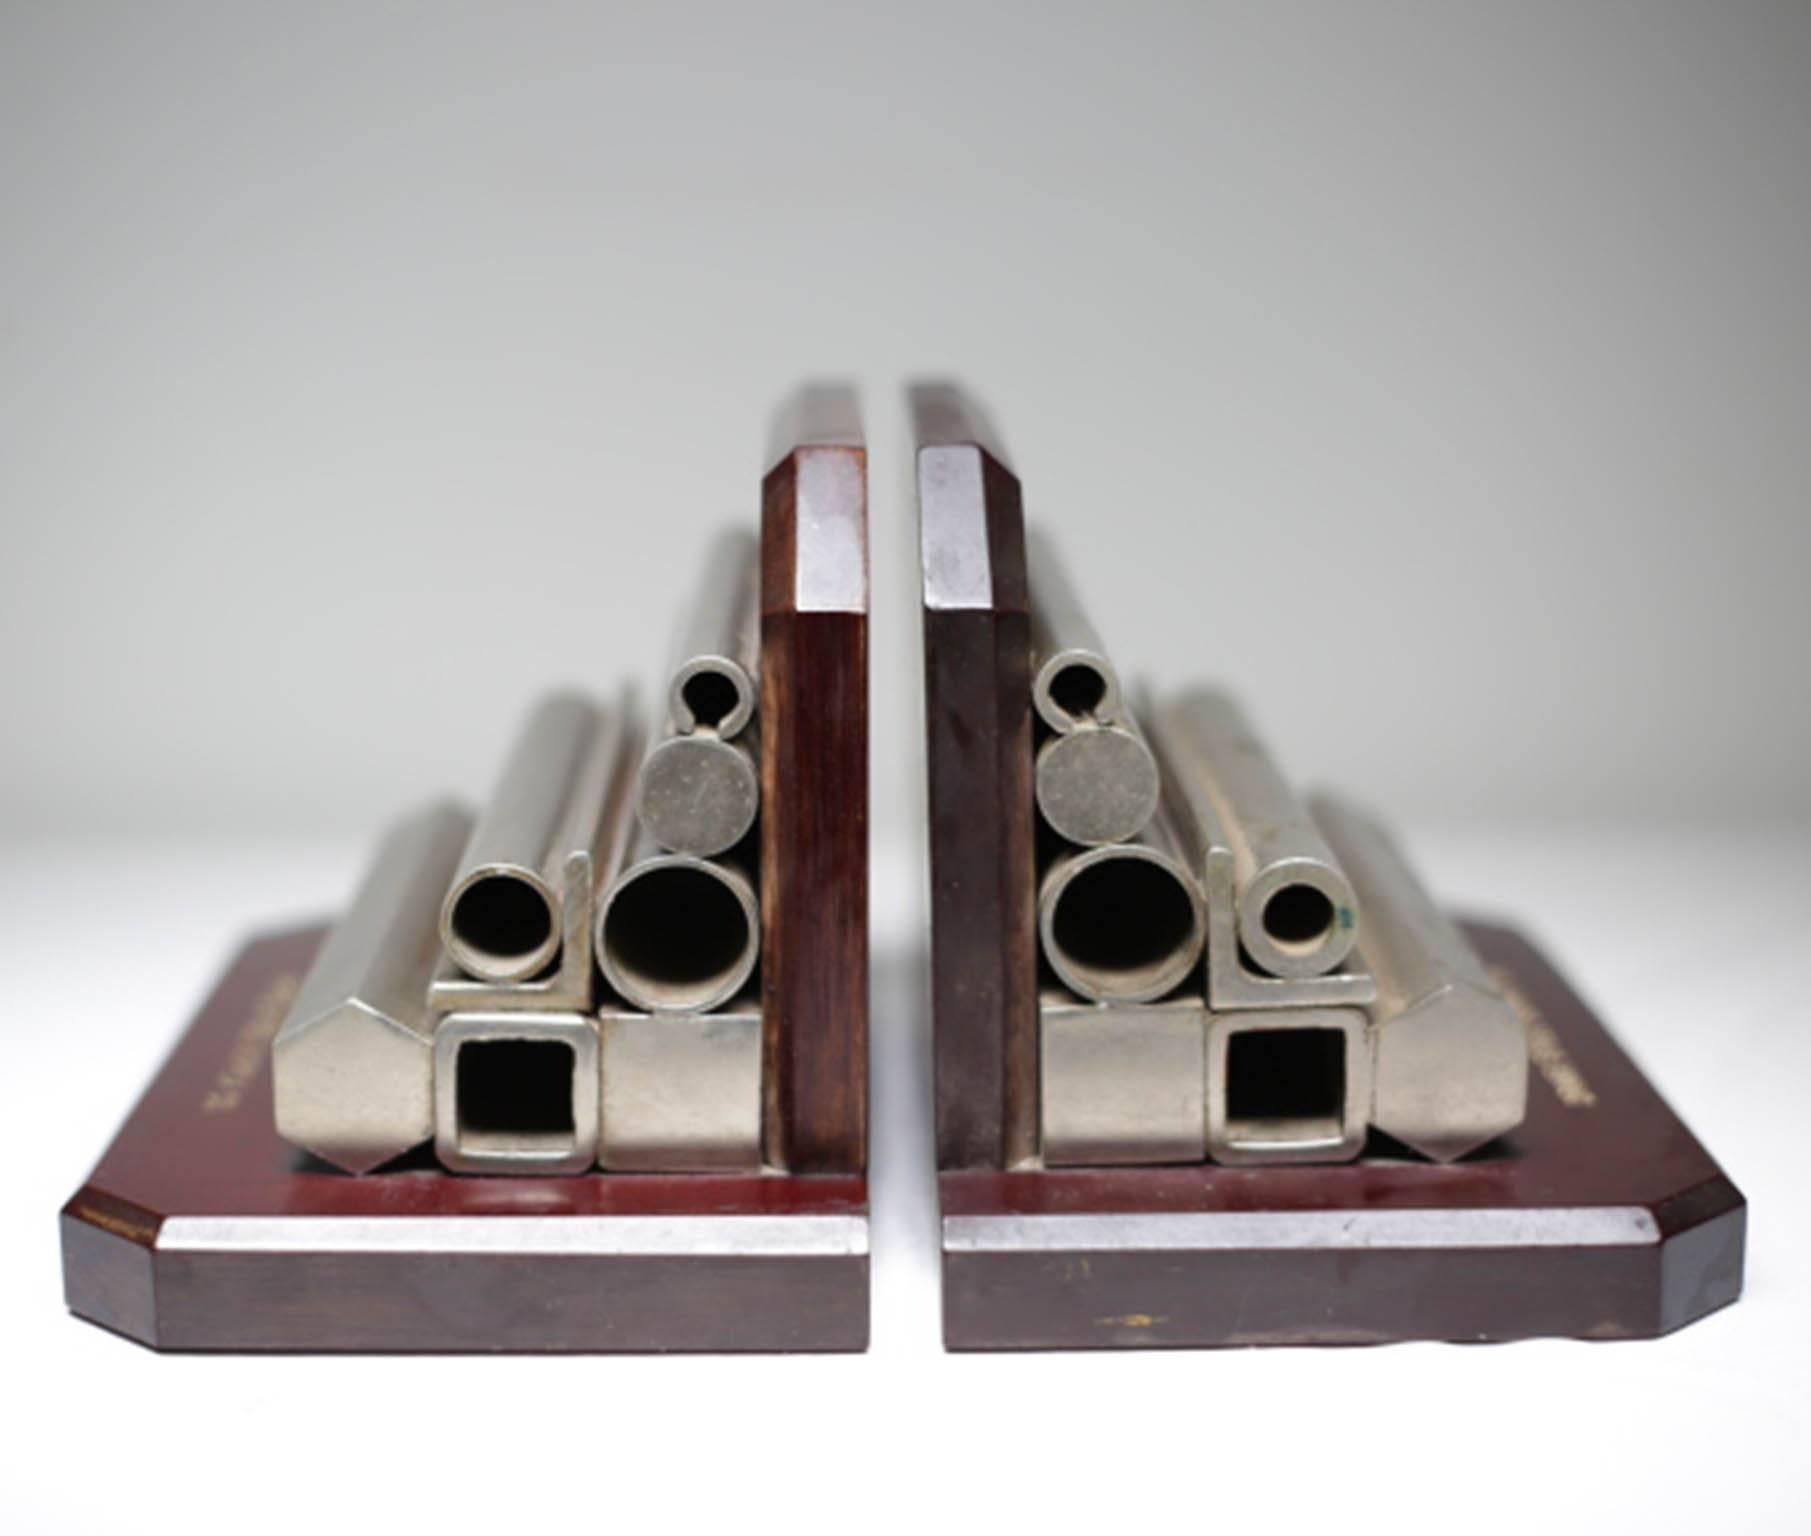 Substantial wood and cold-rolled steel bookends from the Drake Steel supply company that supplied the steel for the golden gate bridge. Look great pushed together as a sculptural piece.